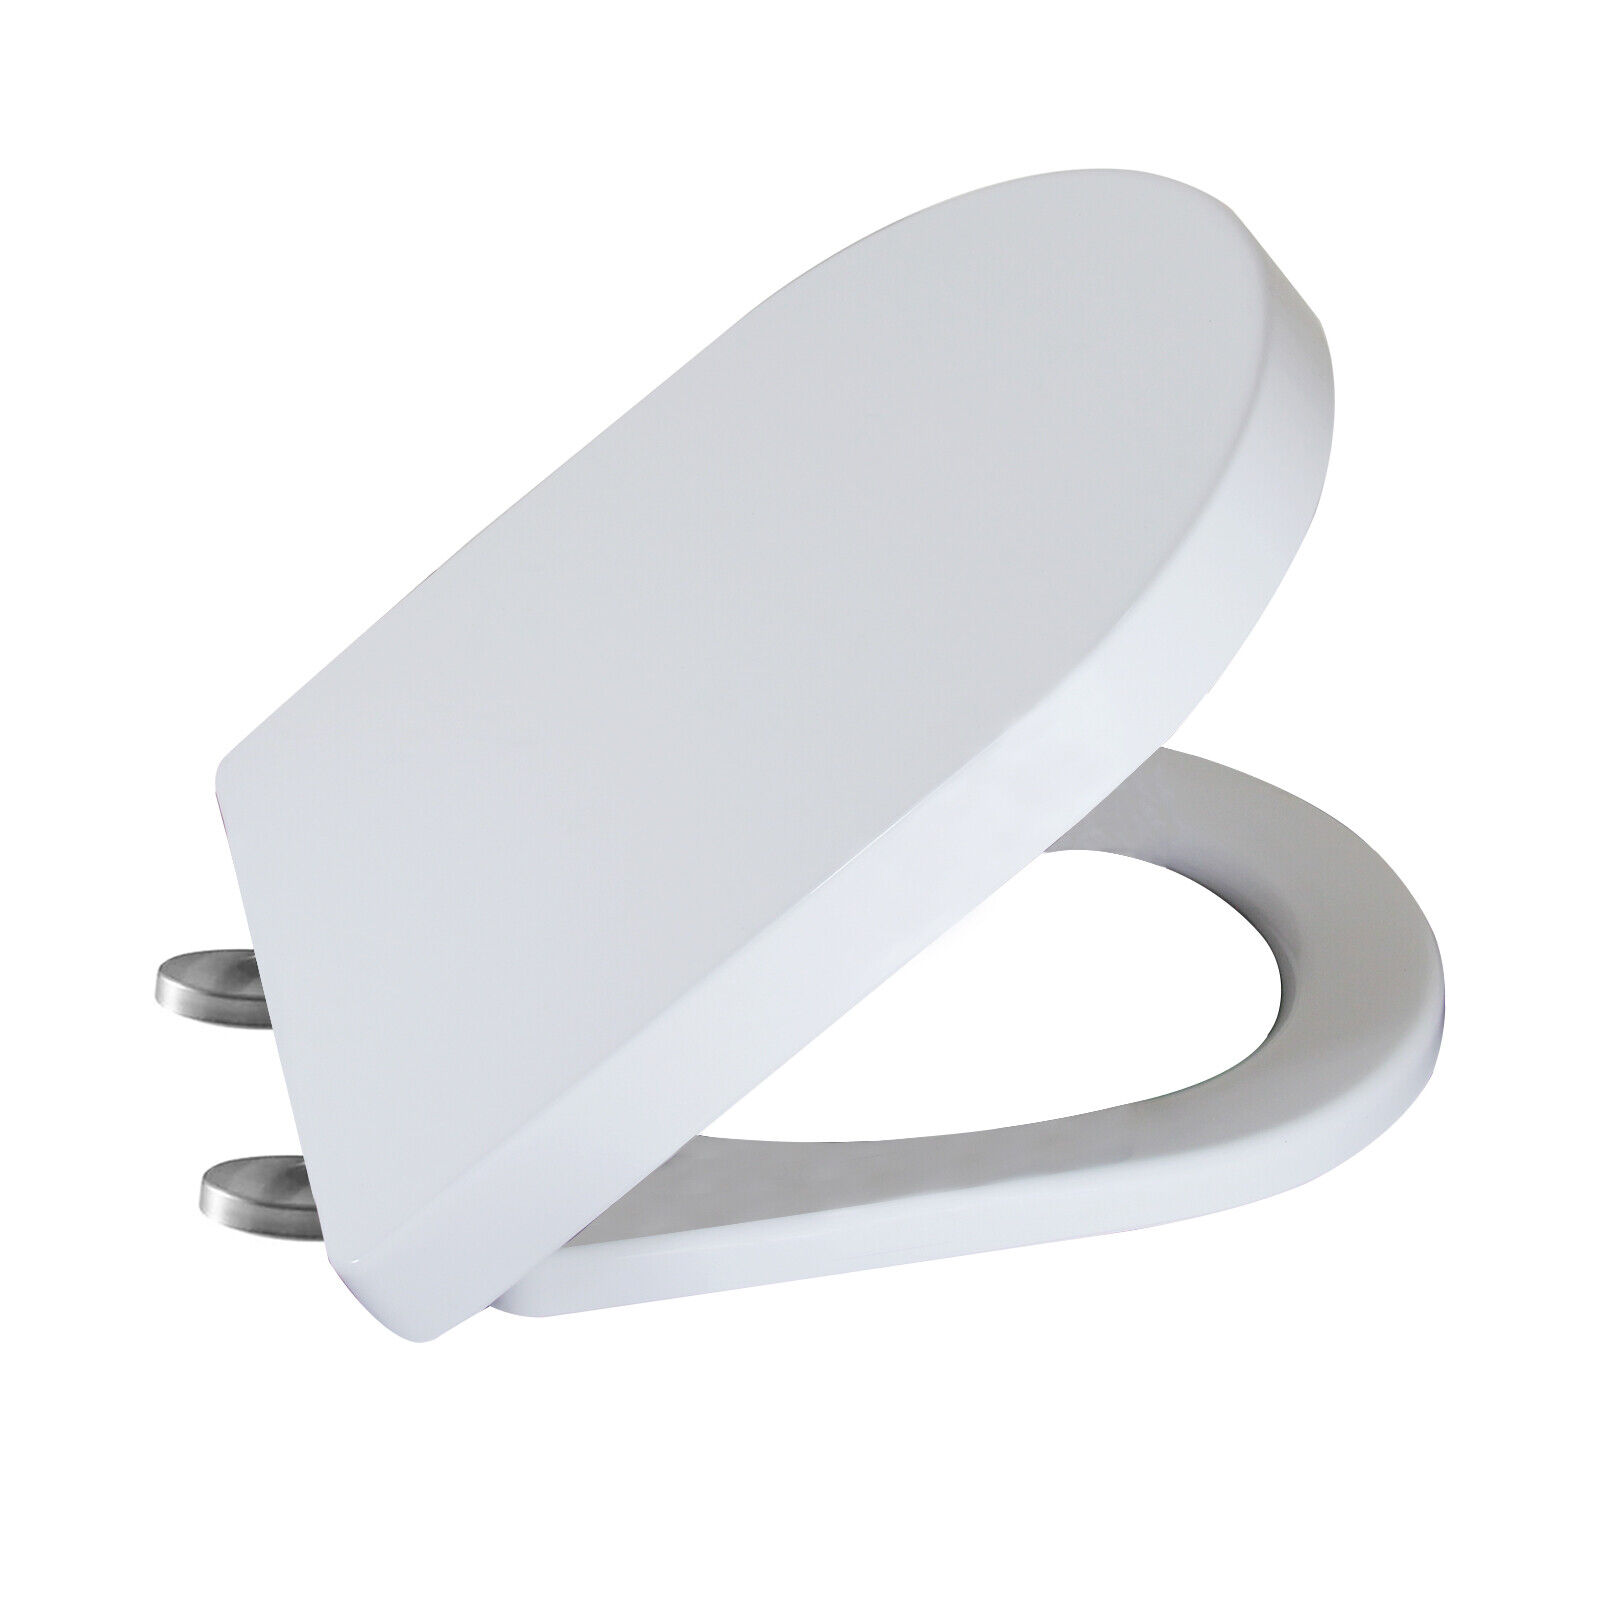 OPEN-BOX UF U Shape Toilet Seat For Small Compact Toilet Soft Close Top Mounted